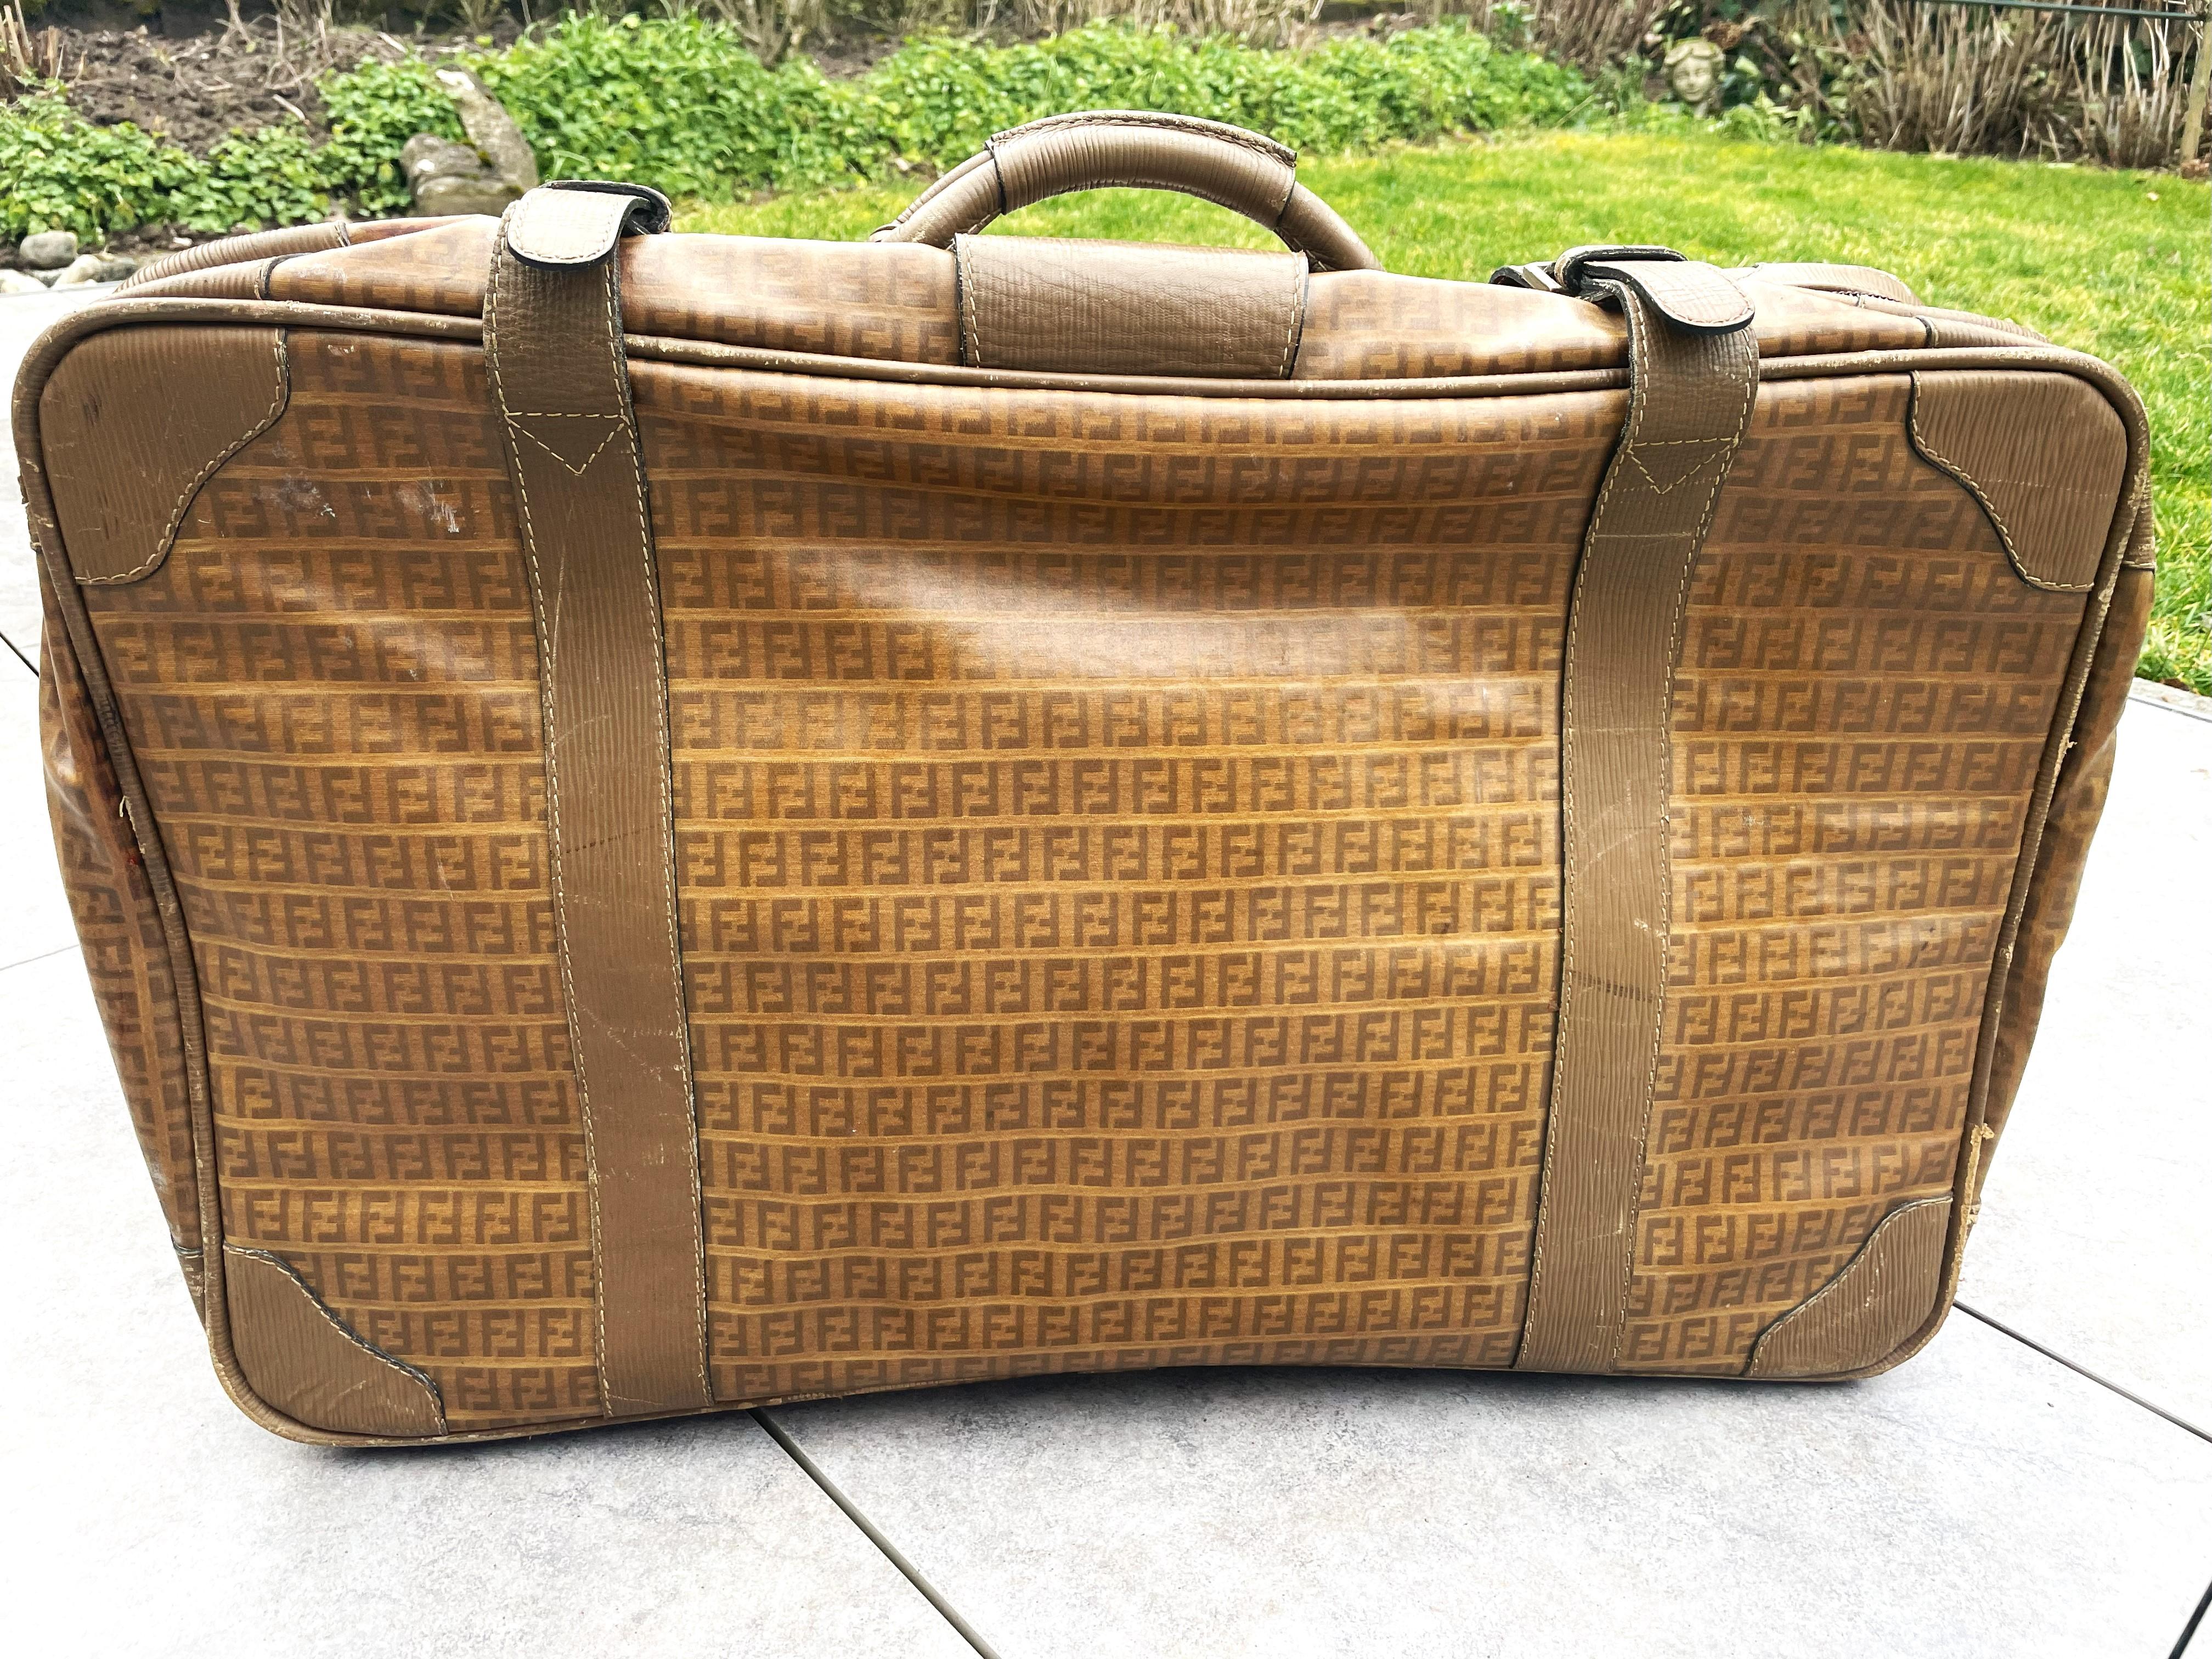 The classic FENDI Zucca FF Monogram suitcase made of canvas and leather.
 Leather handle, corners and case strap. Inside lined with brown fabric, a long compartment on the side with a zipper and leather strap. Very good condition inside, no